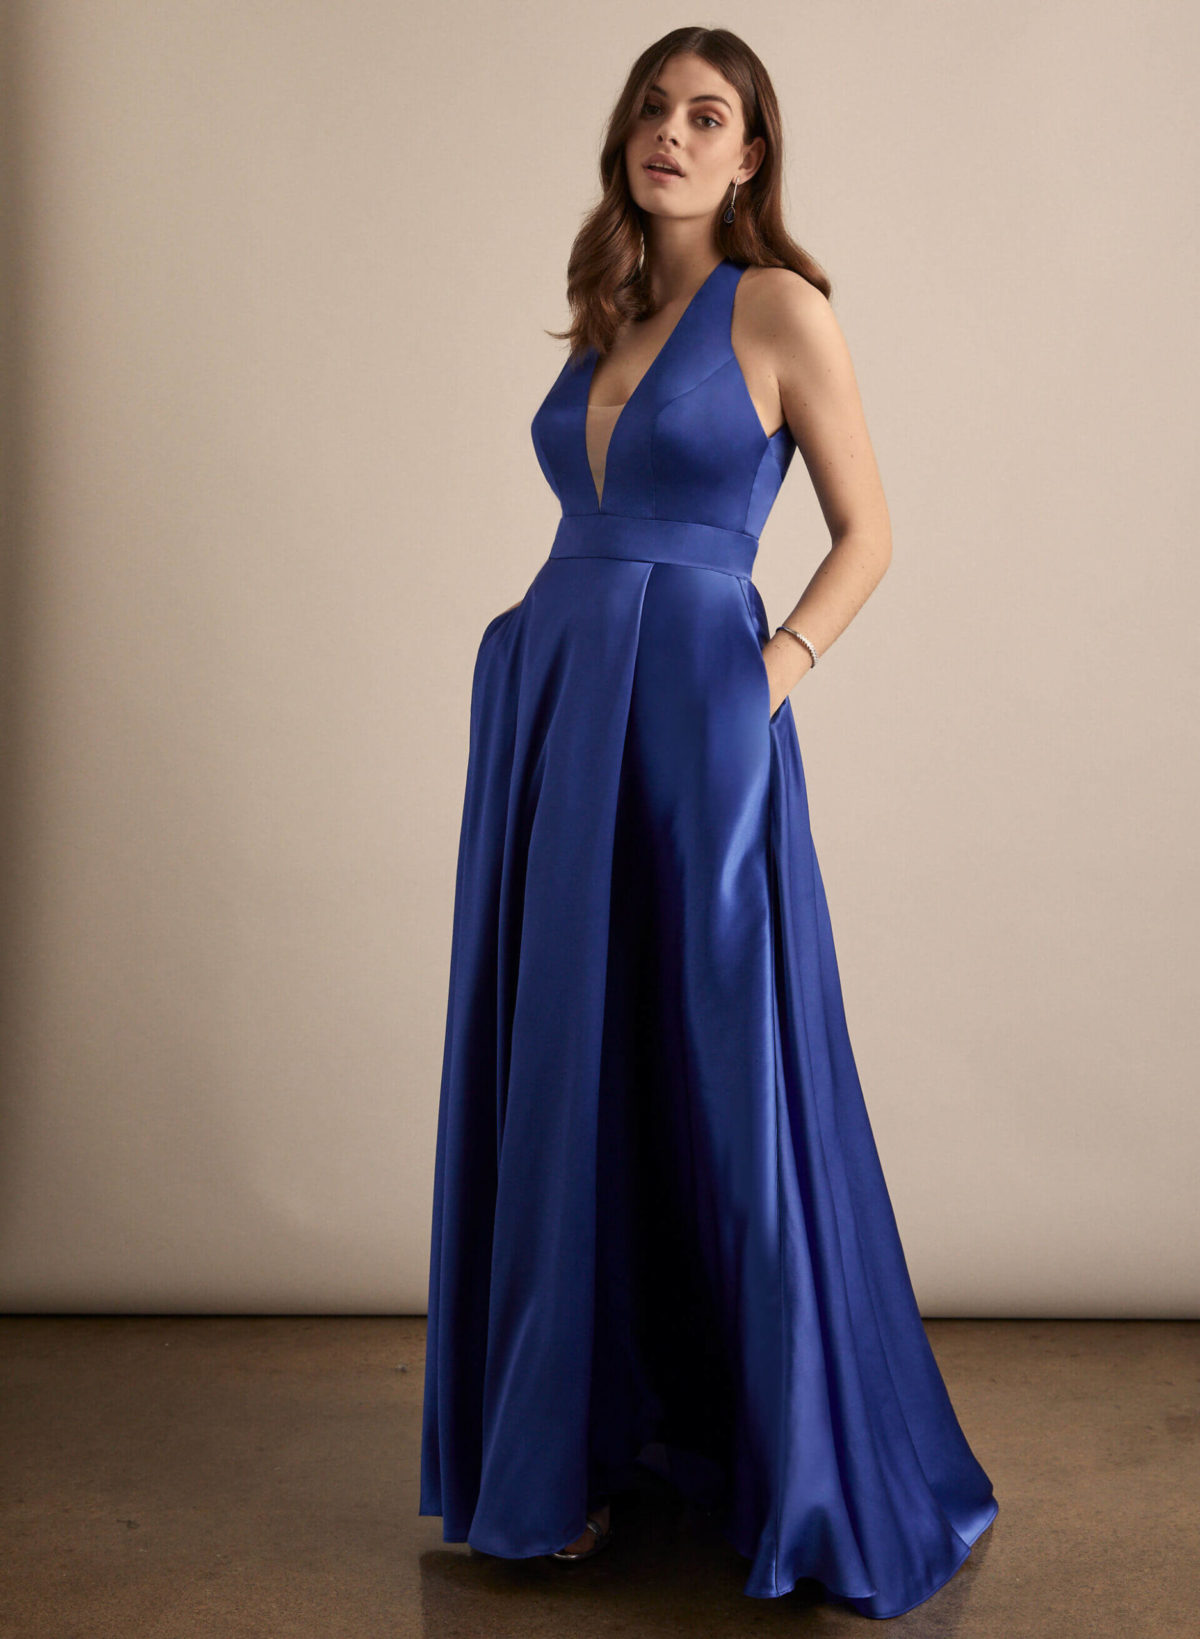 A young woman wearing a V-neck satin prom dress with pockets.